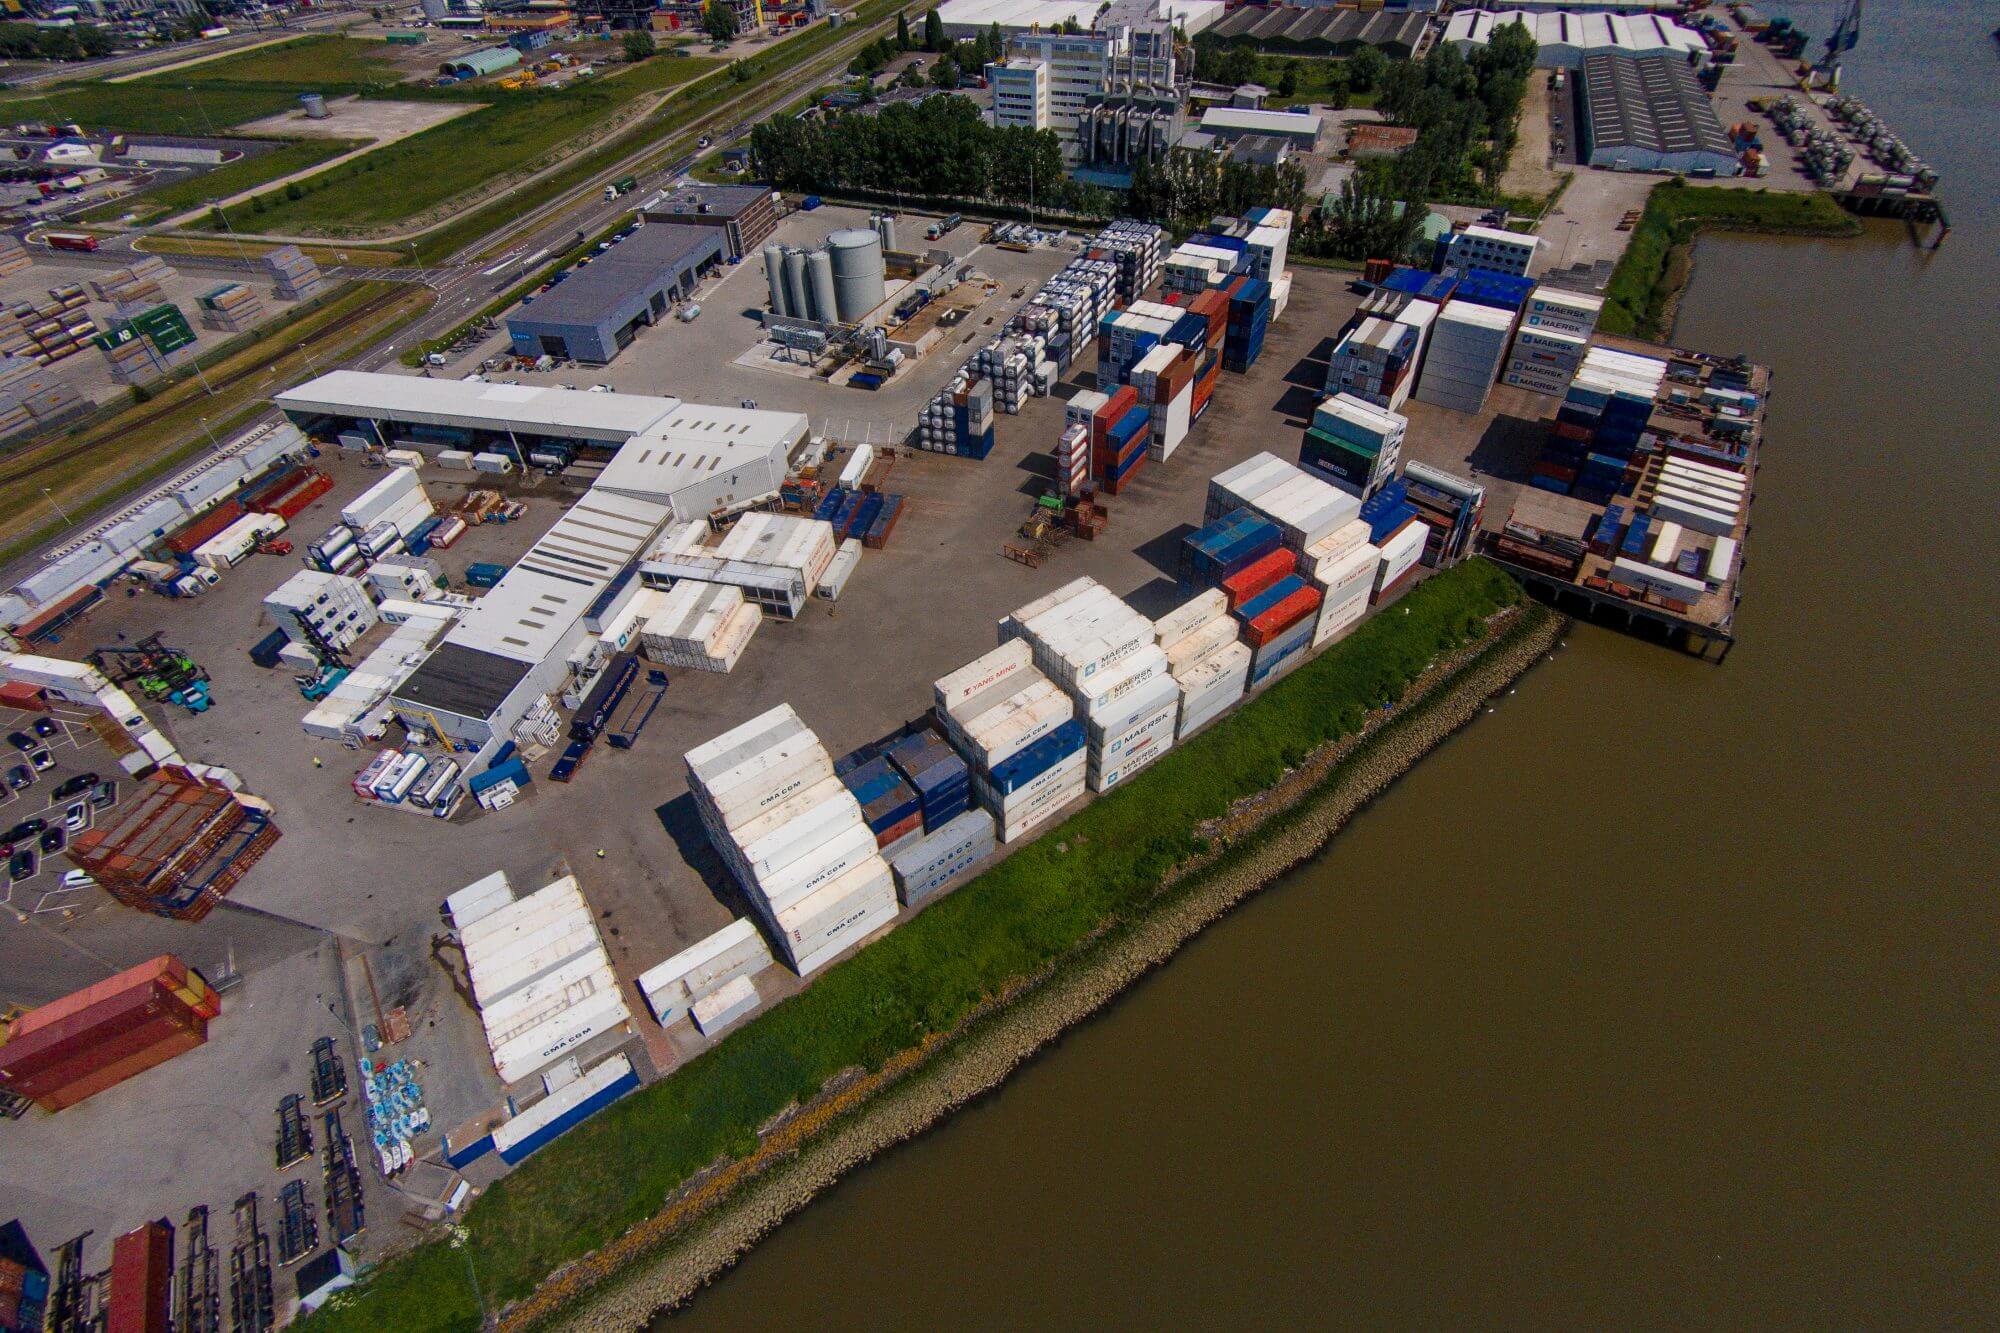 Main container depot from Alconet in Rotterdam